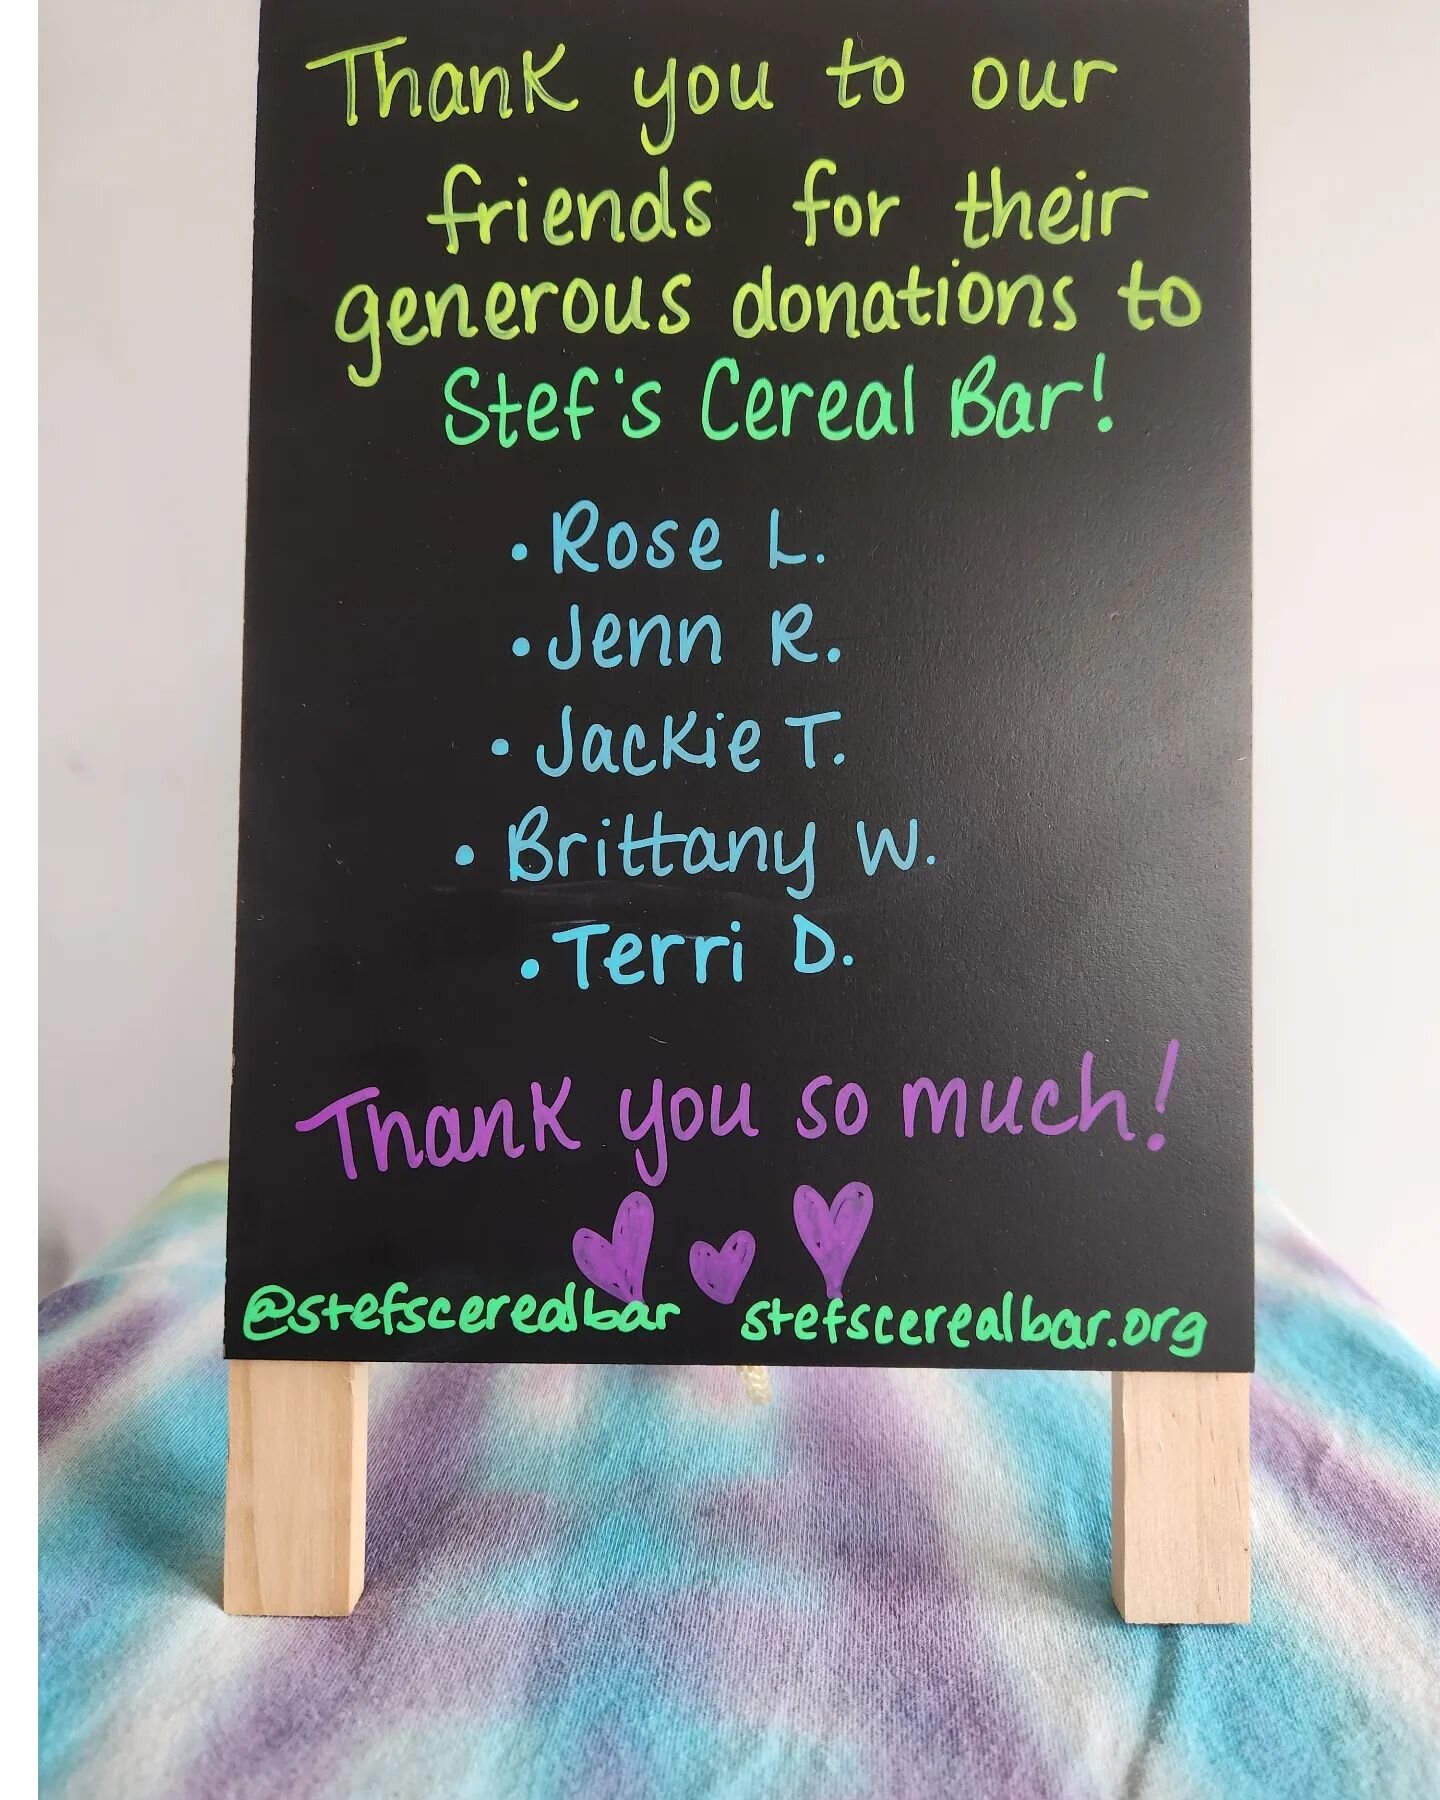 We would like to make a very special shout out to our friends who made a monetary donation to @stefscerealbar ! Your help is truly appreciated and will help provide lots of free cereal to anyone that is hungry! Please visit our website for more infor